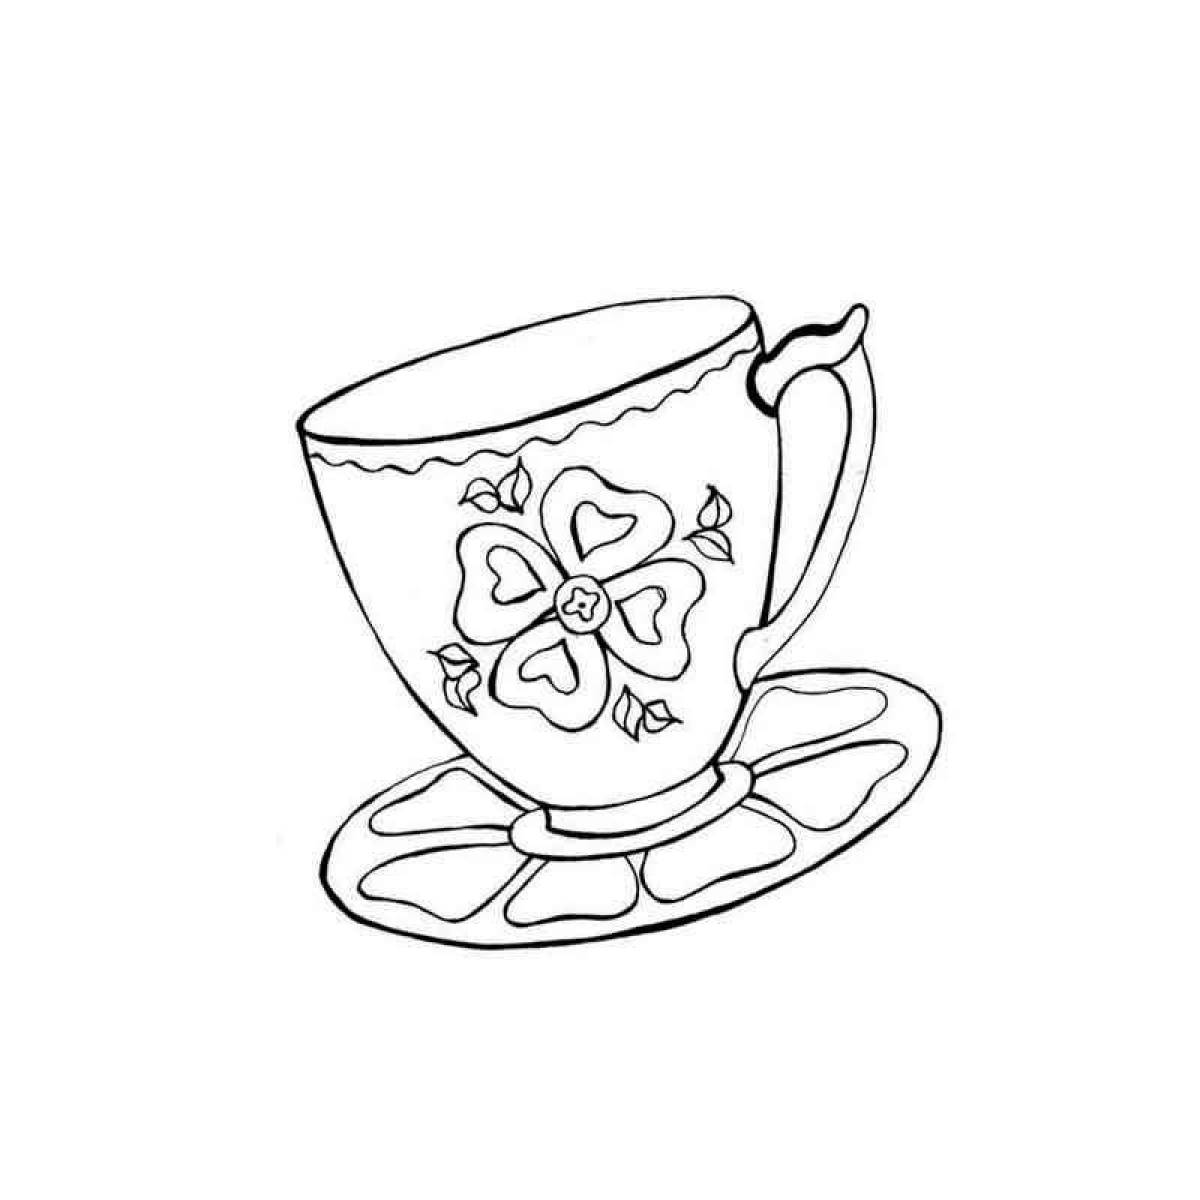 Coloring bright cup and saucer